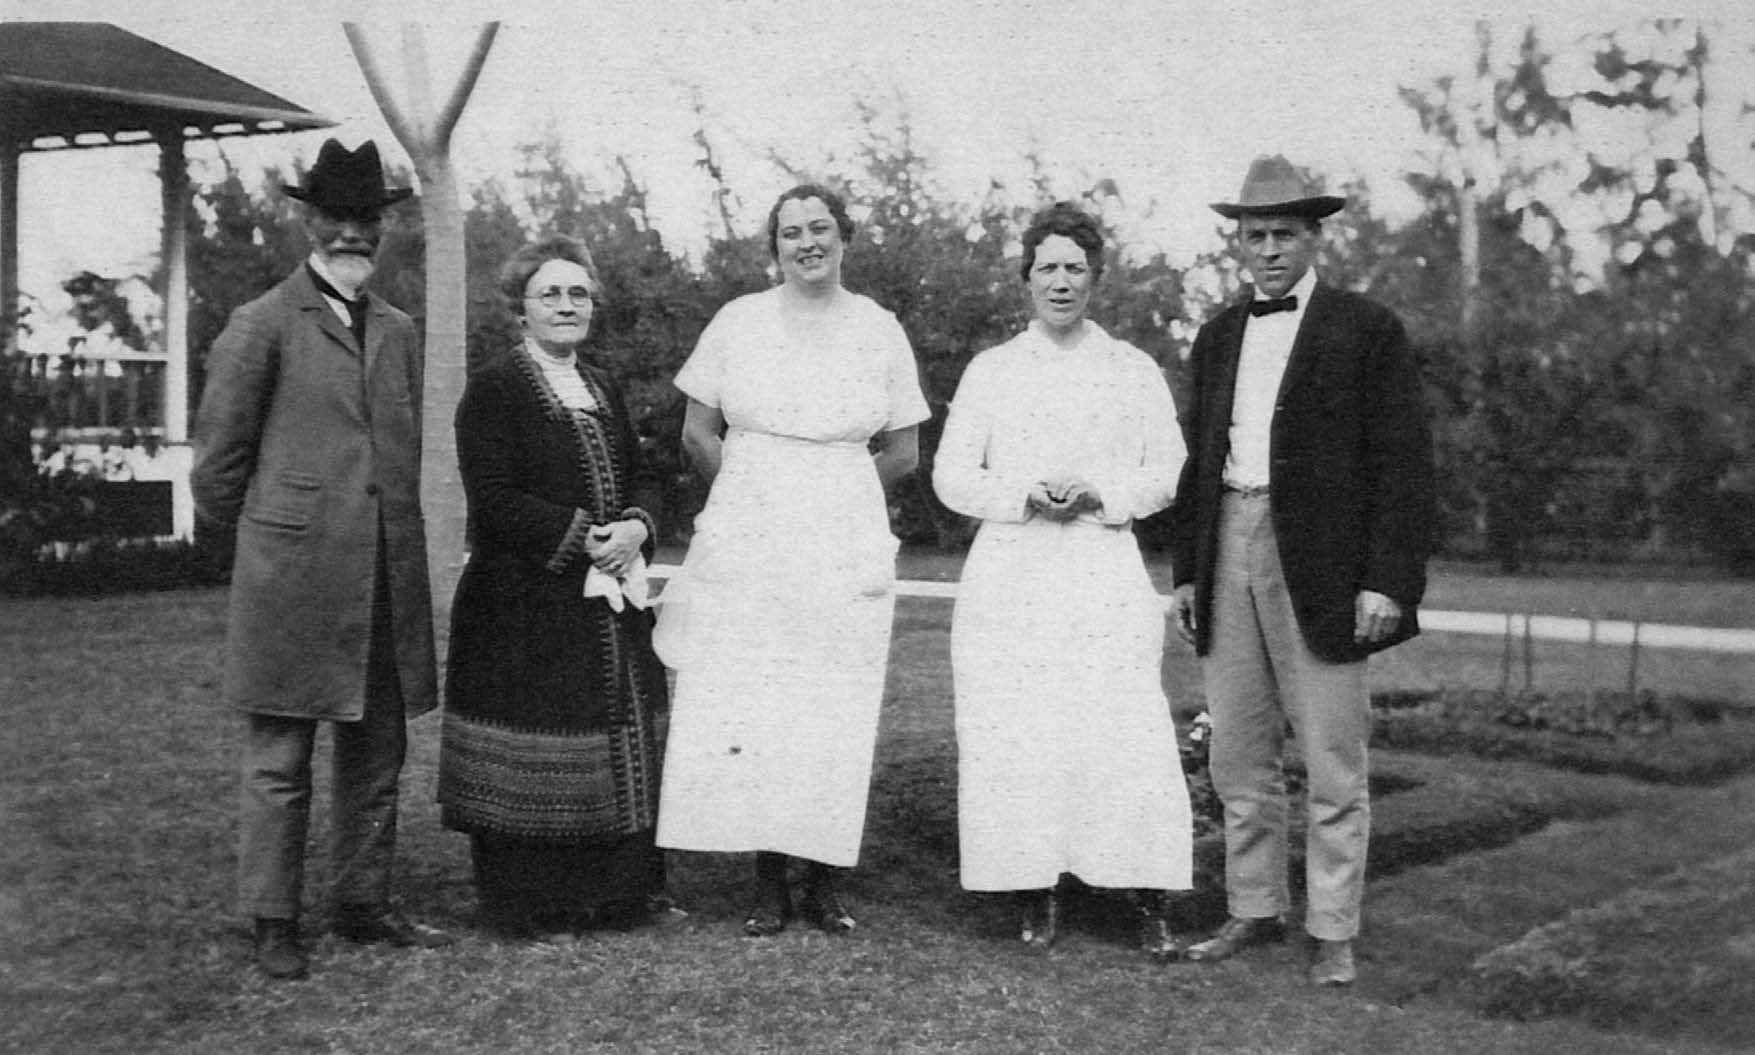 From left to right: Duncan and Catherine McAllister, Katie McAllister, and Olivia and Mark Waddoups. Called as the Hawaii Temple’s first recorder, Duncan M. McAllister was considered perhaps the most knowledgeable person regarding temple work and was a valuable asset to the early work done in the Hawaii Temple. Courtesy of BYU–Hawaii Archives.